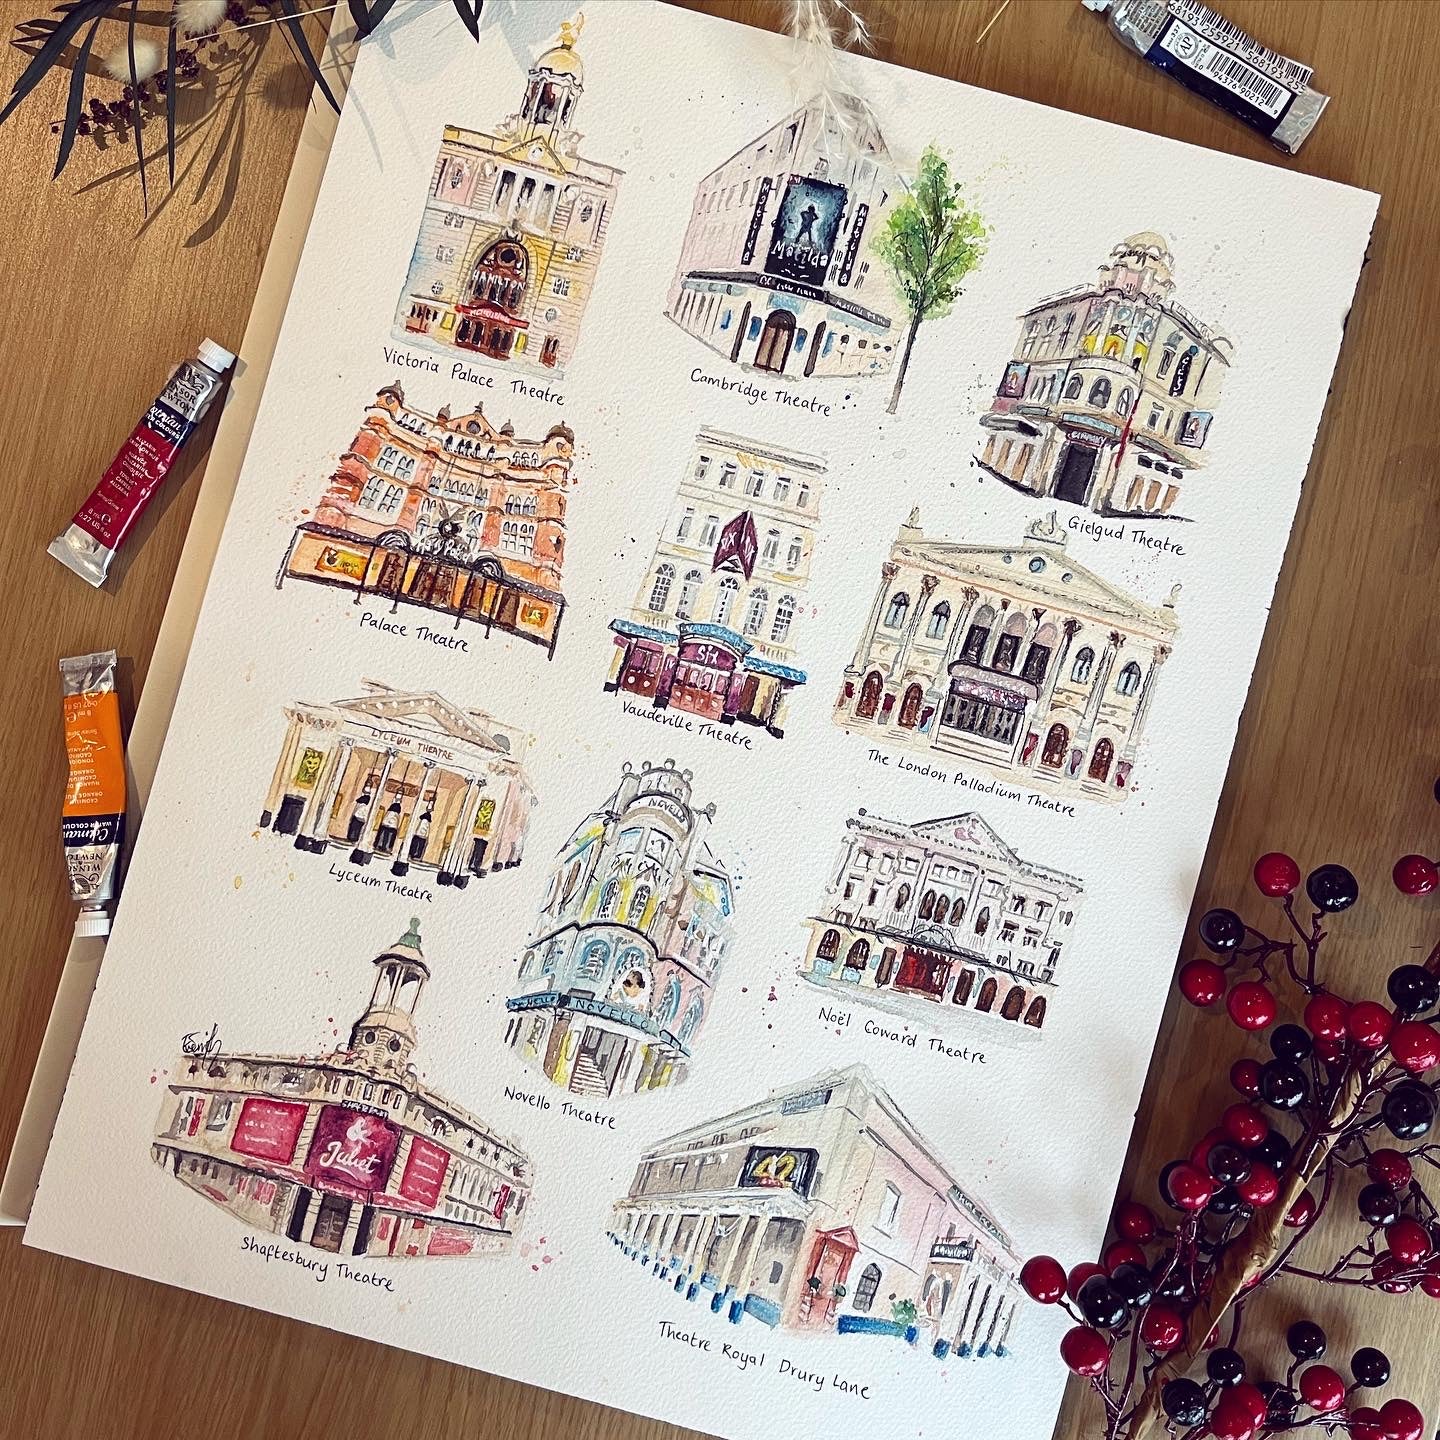 A selection of watercolour illustrations of West End theatres by London based artist and performer, Eve Leoni Art.